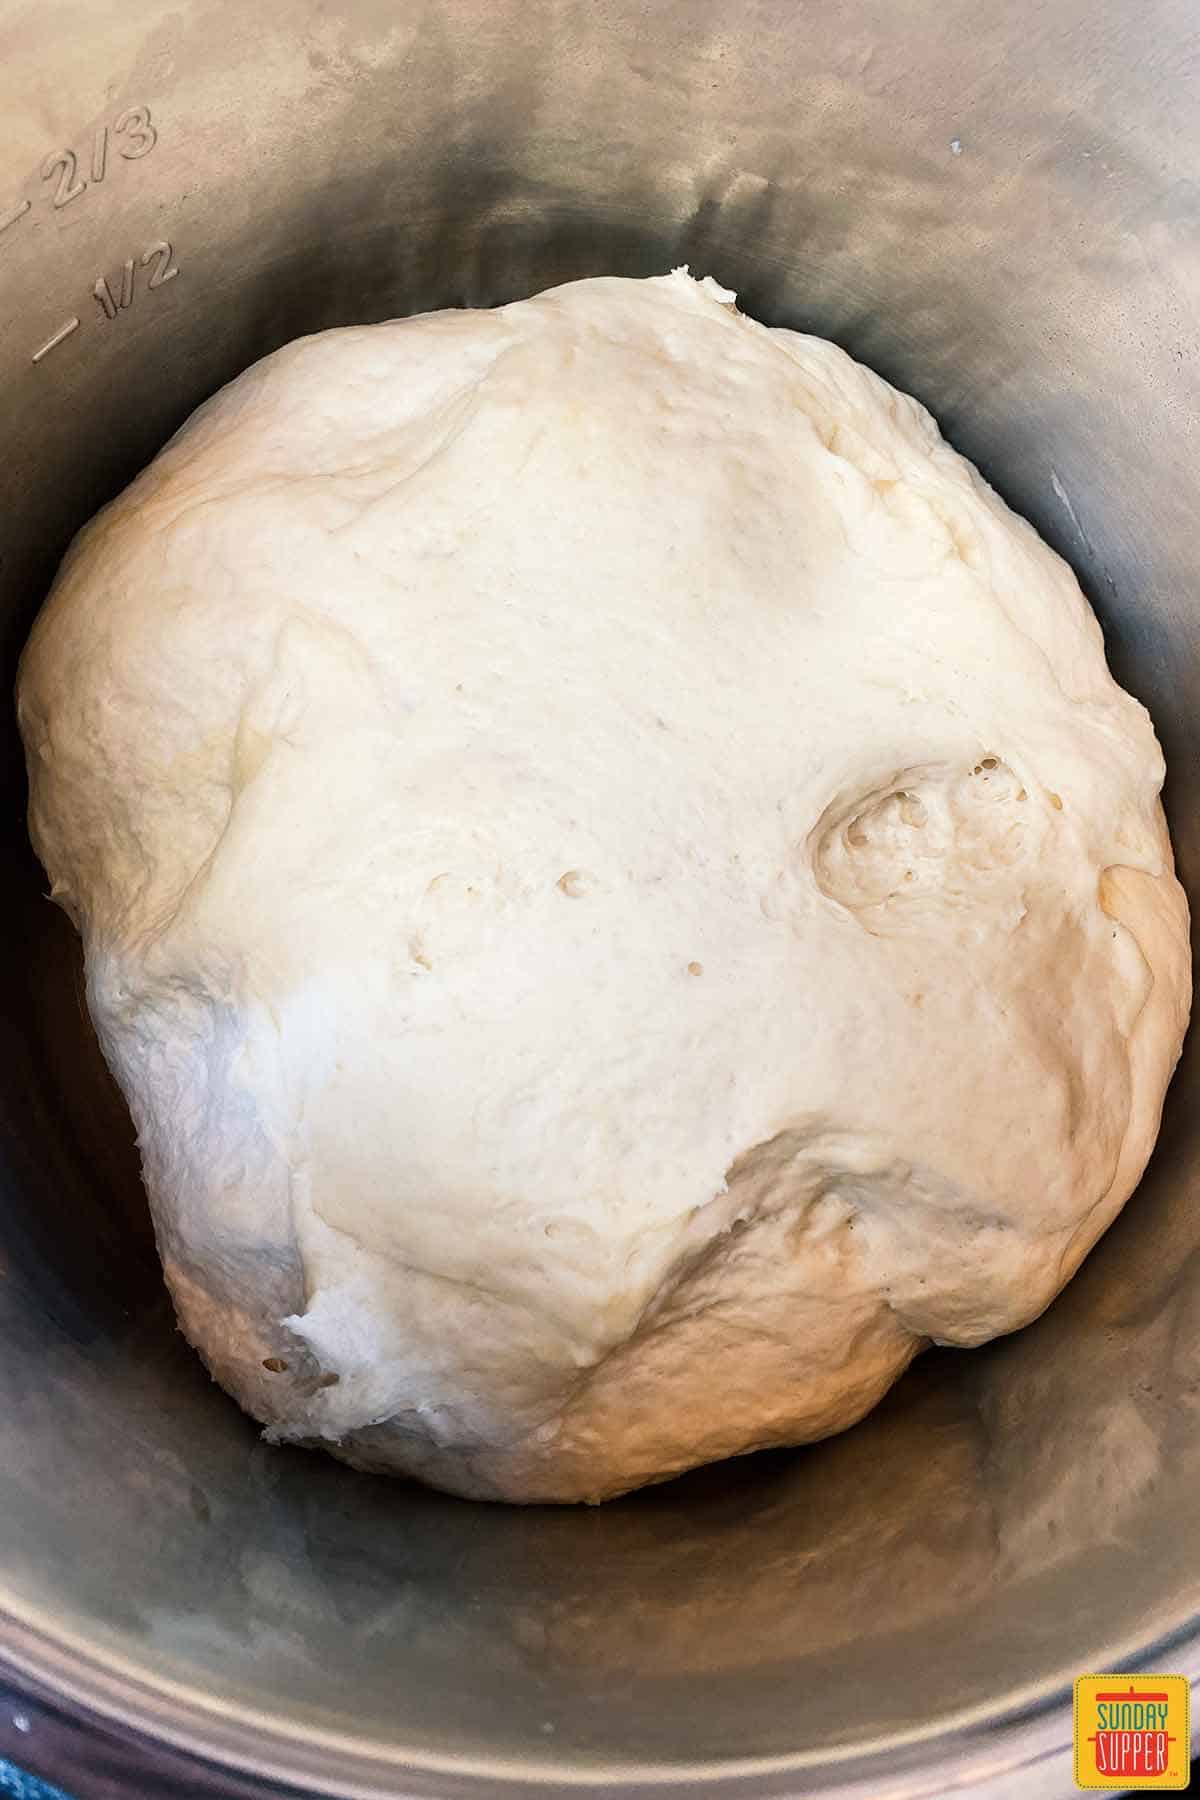 How to make french bread - Dough proofing in the instant pot